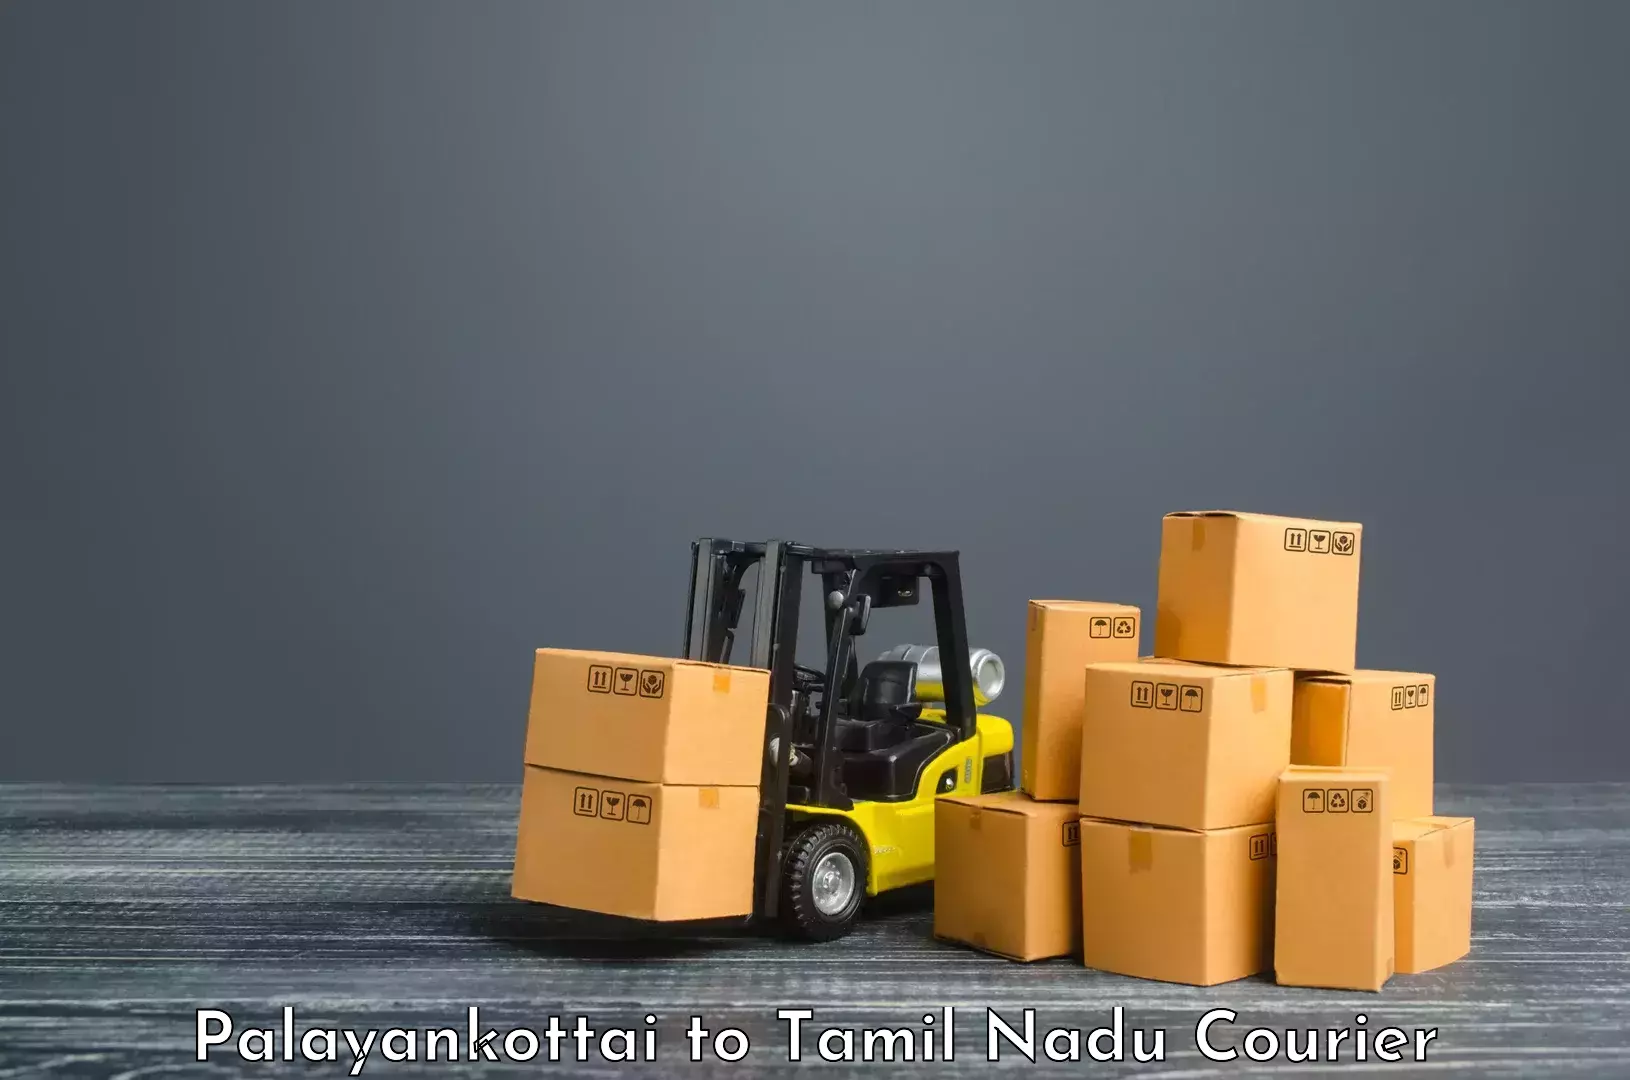 Flexible delivery schedules Palayankottai to Udagamandalam